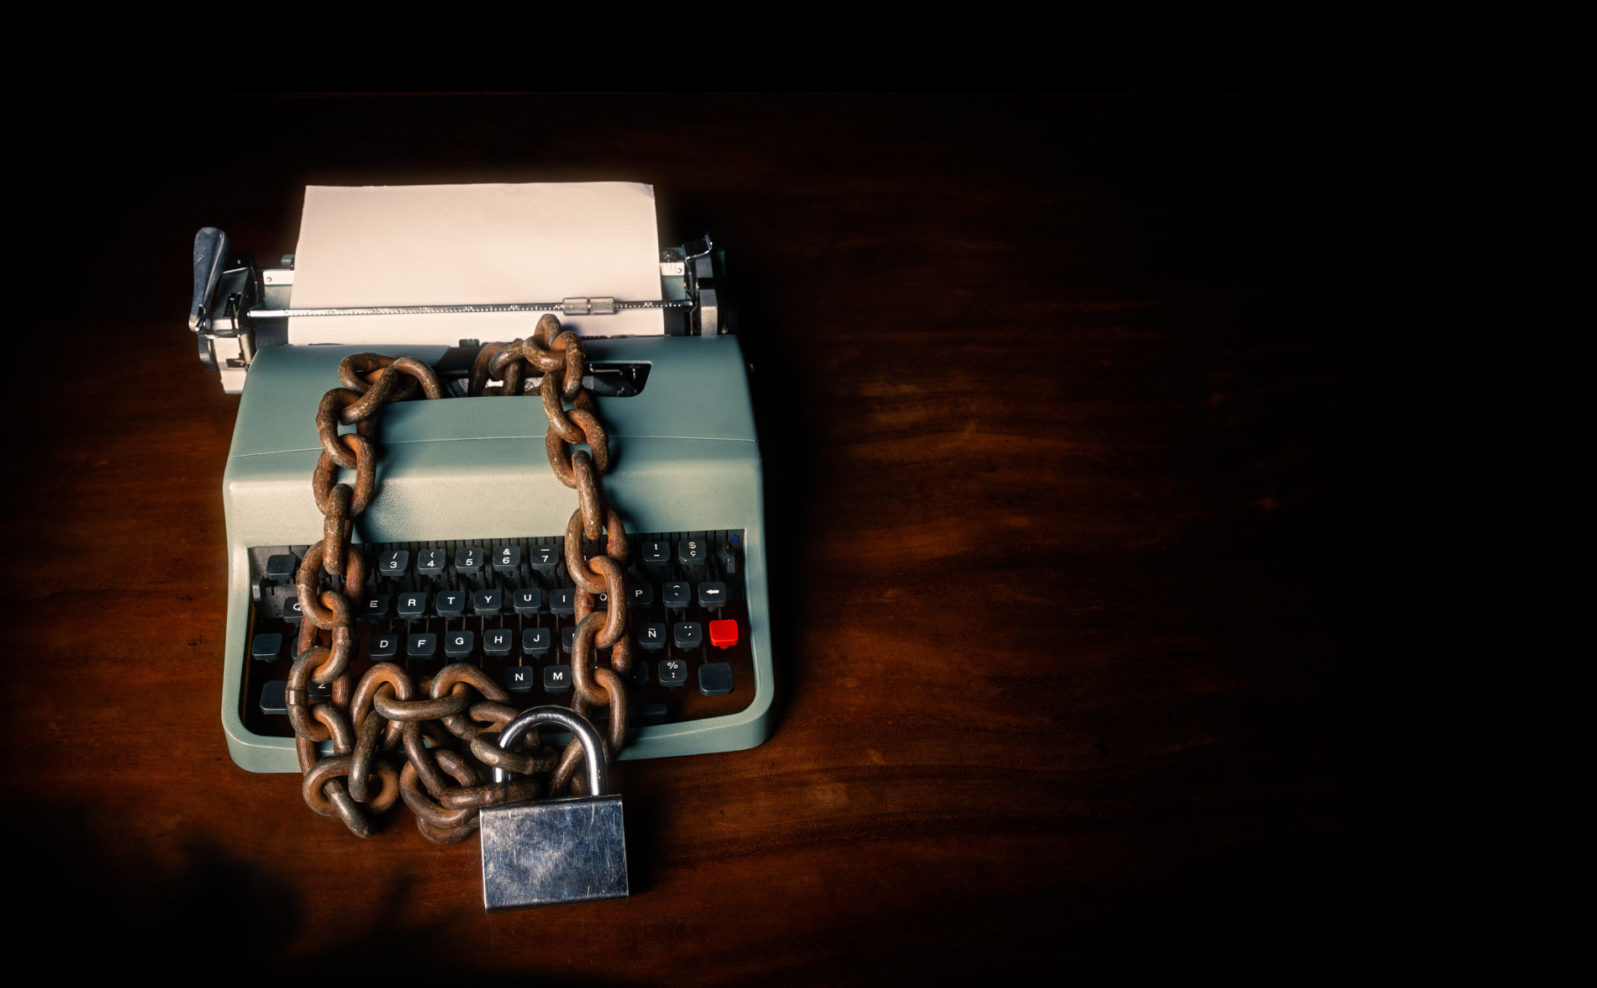 Information censorship - Typewriter locked with a chain